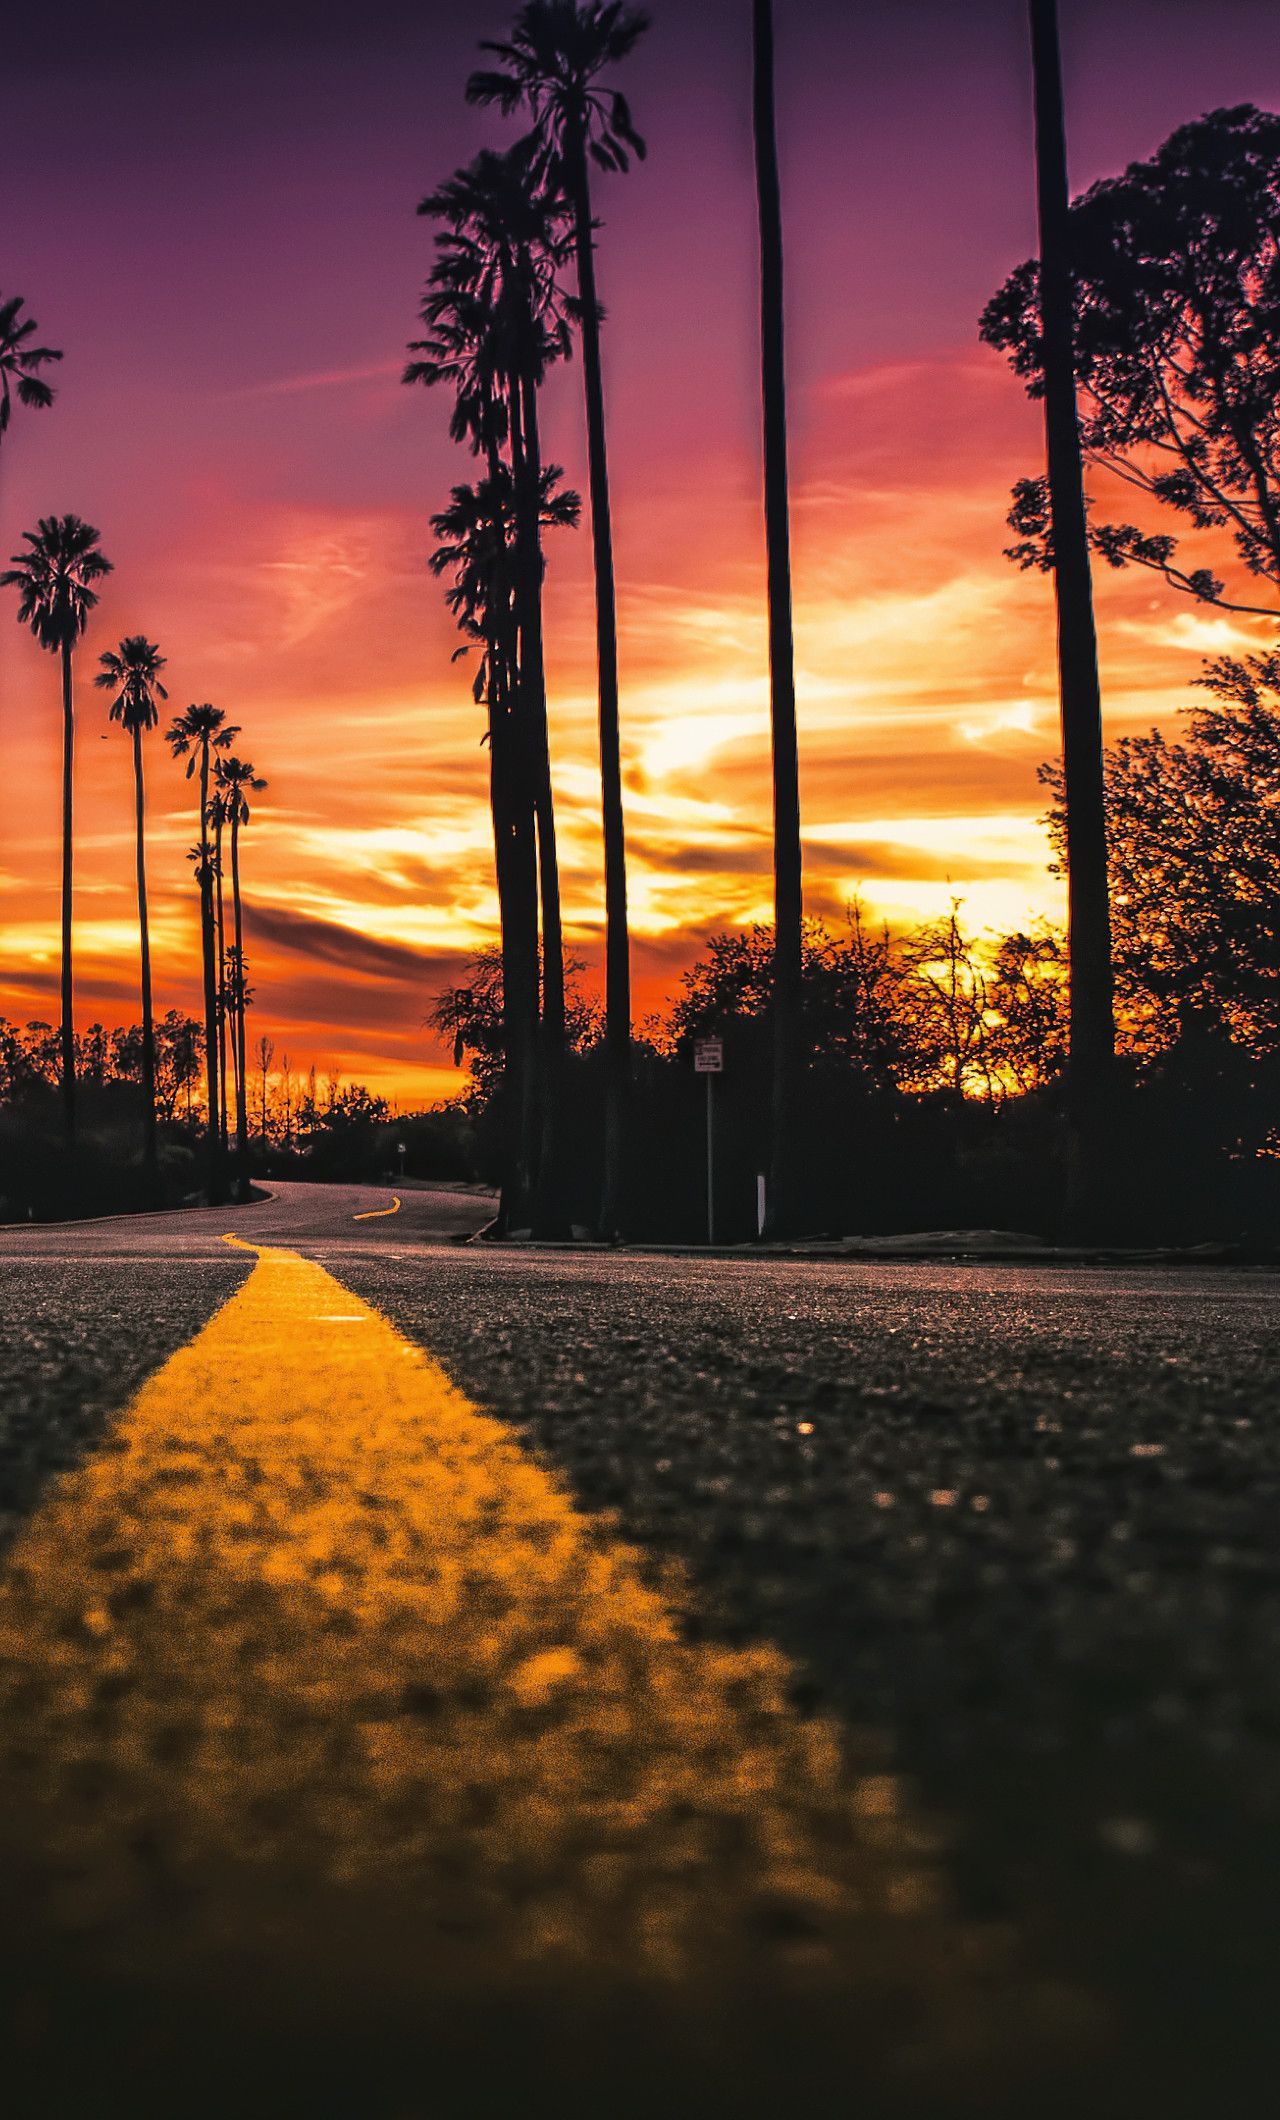 A road with palm trees in the background - California